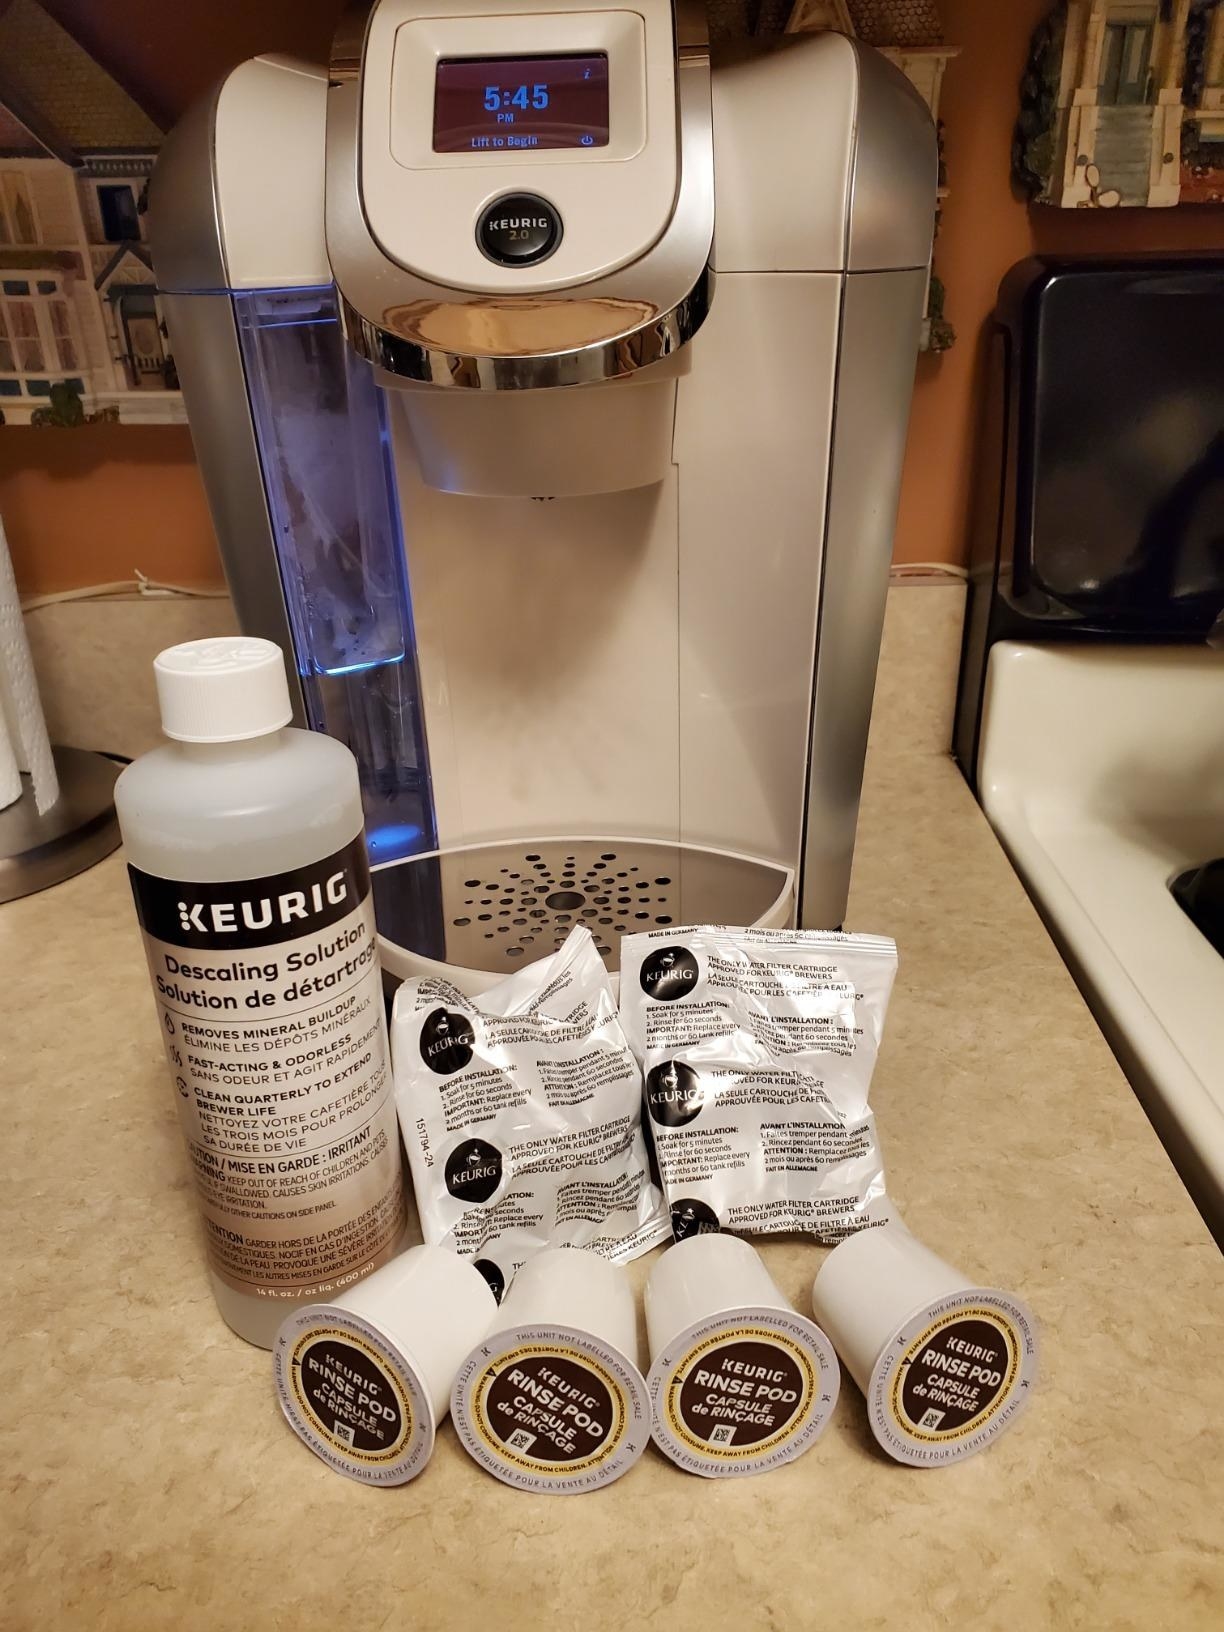 a reviewer photo of the contents of the cleaning kit set up in front of a Keurig